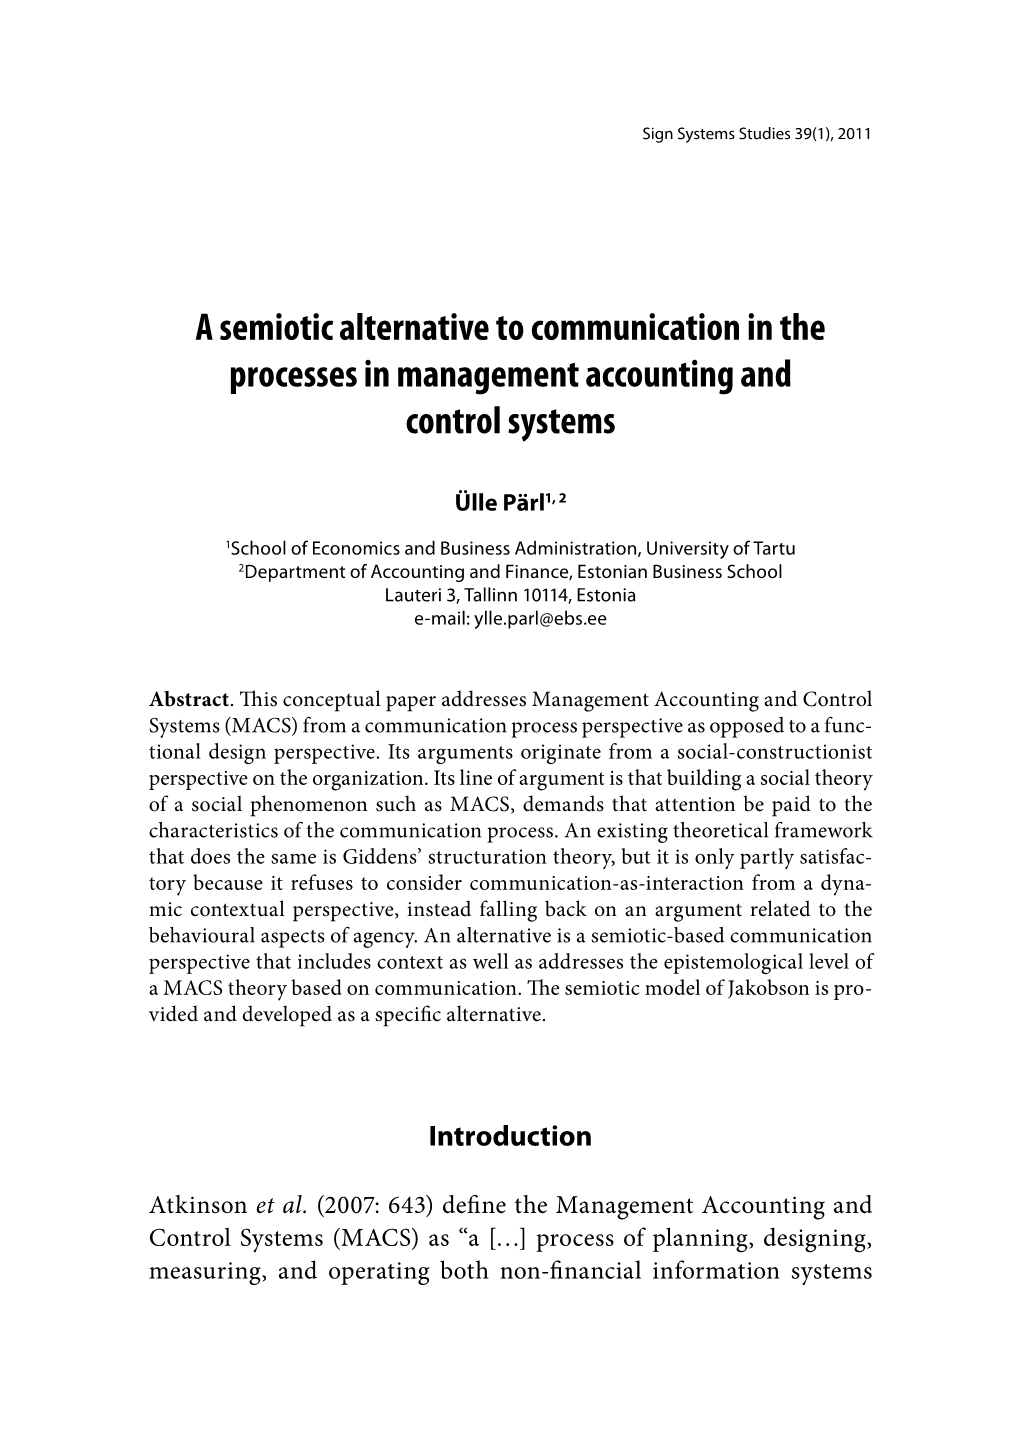 A Semiotic Alternative to Communication in the Processes in Management Accounting and Control Systems